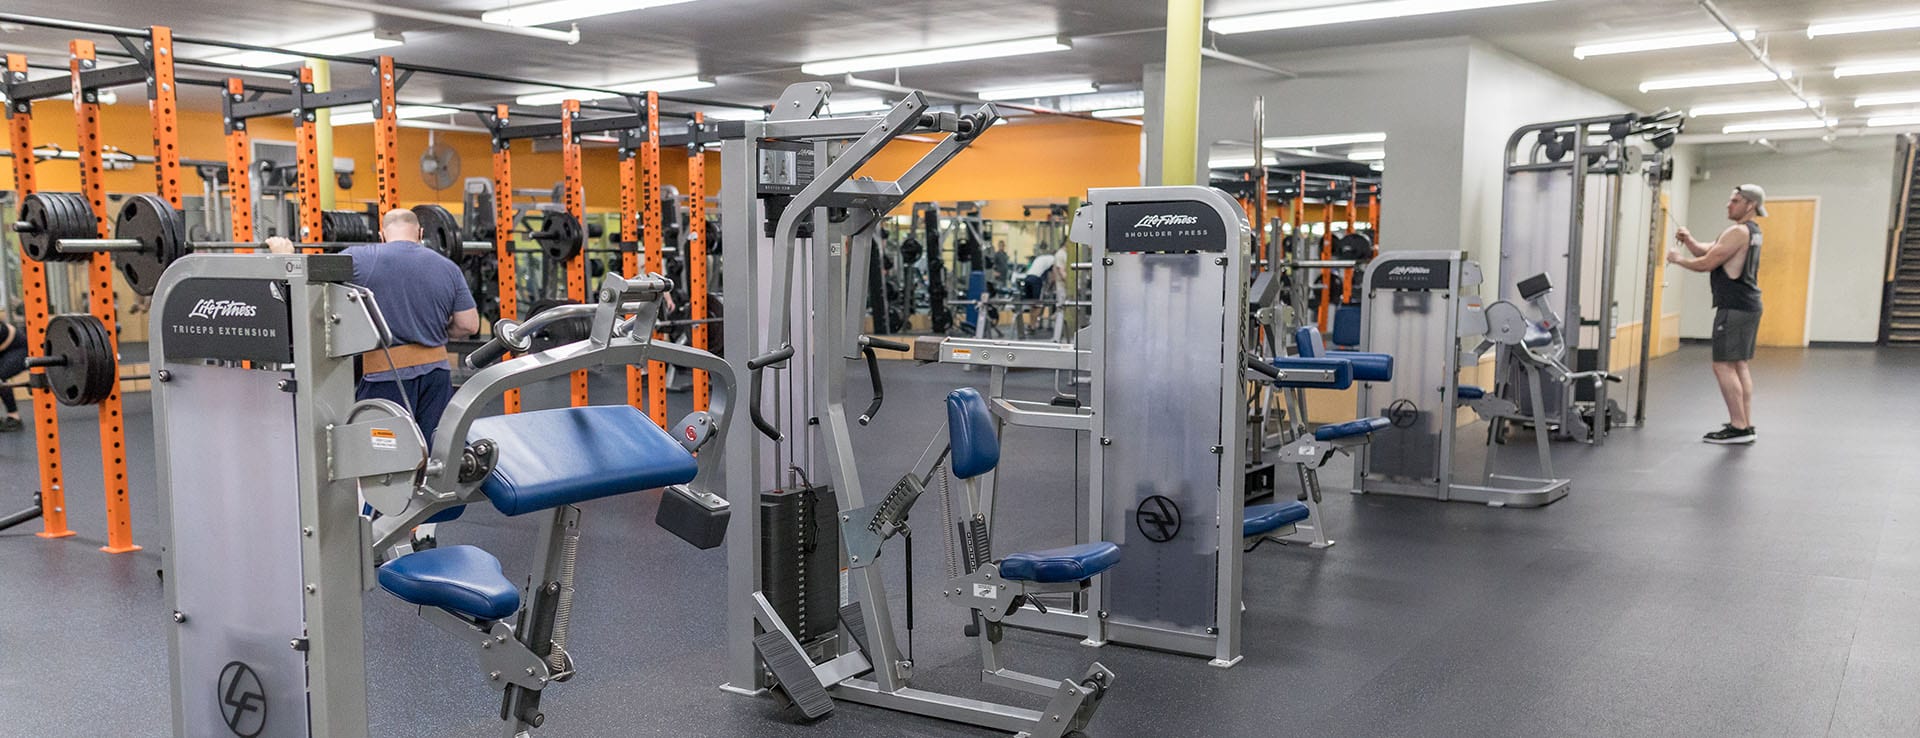 weight loss options at modern gym in albany